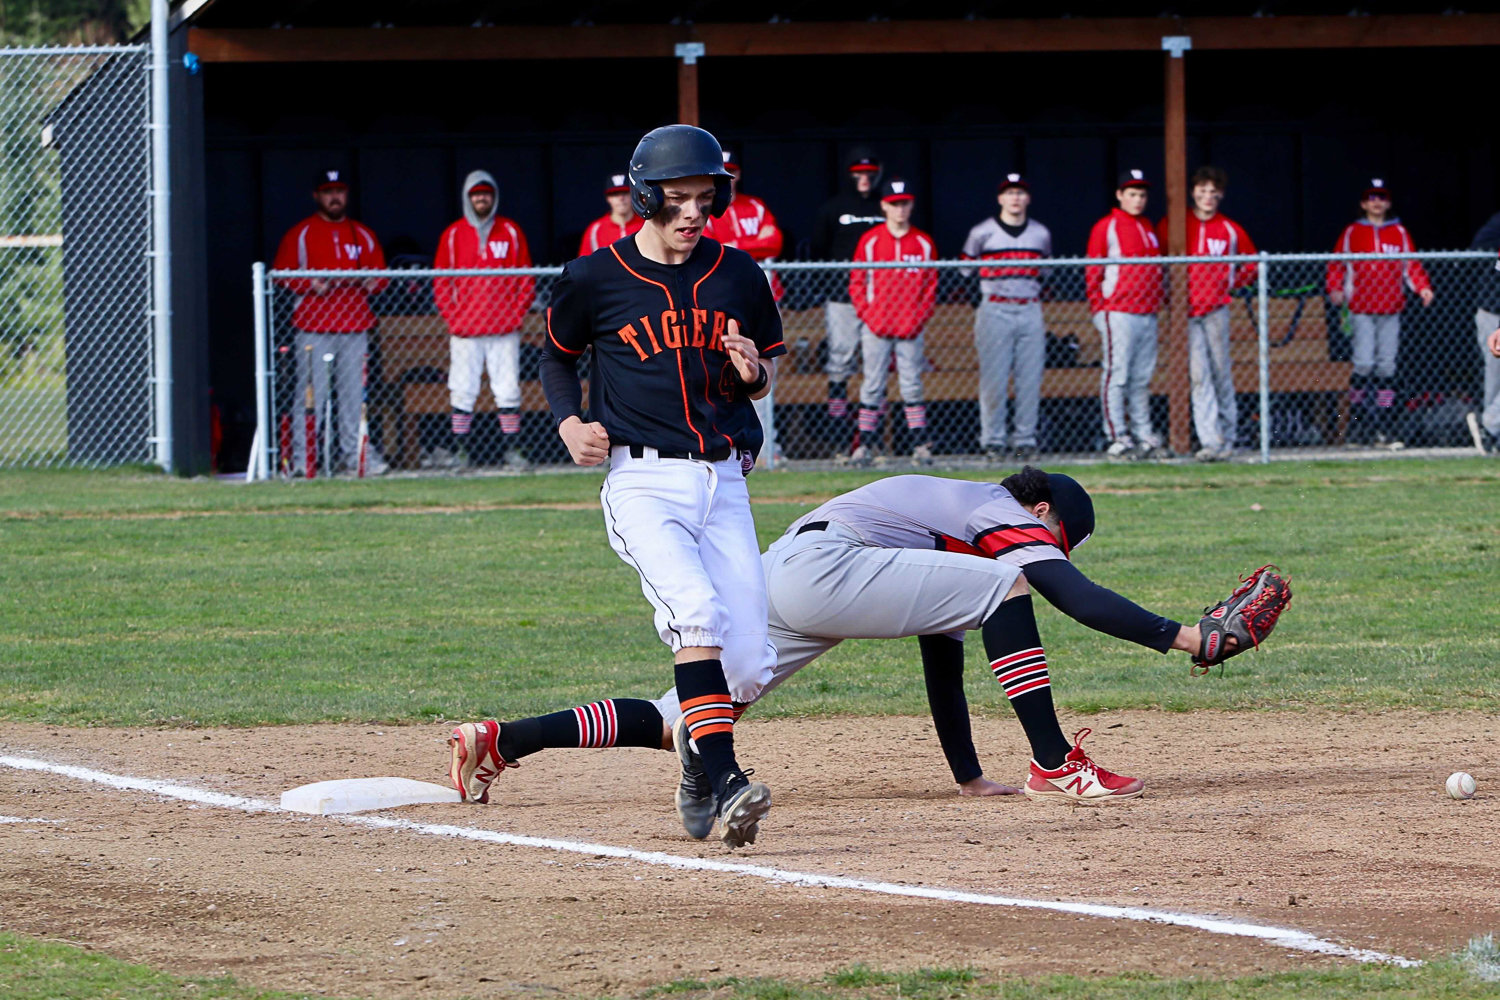 Napavine catcher Ashton Demarest reaches first after Wahkiakum's first baseman can't snag a throw for an out March 30.